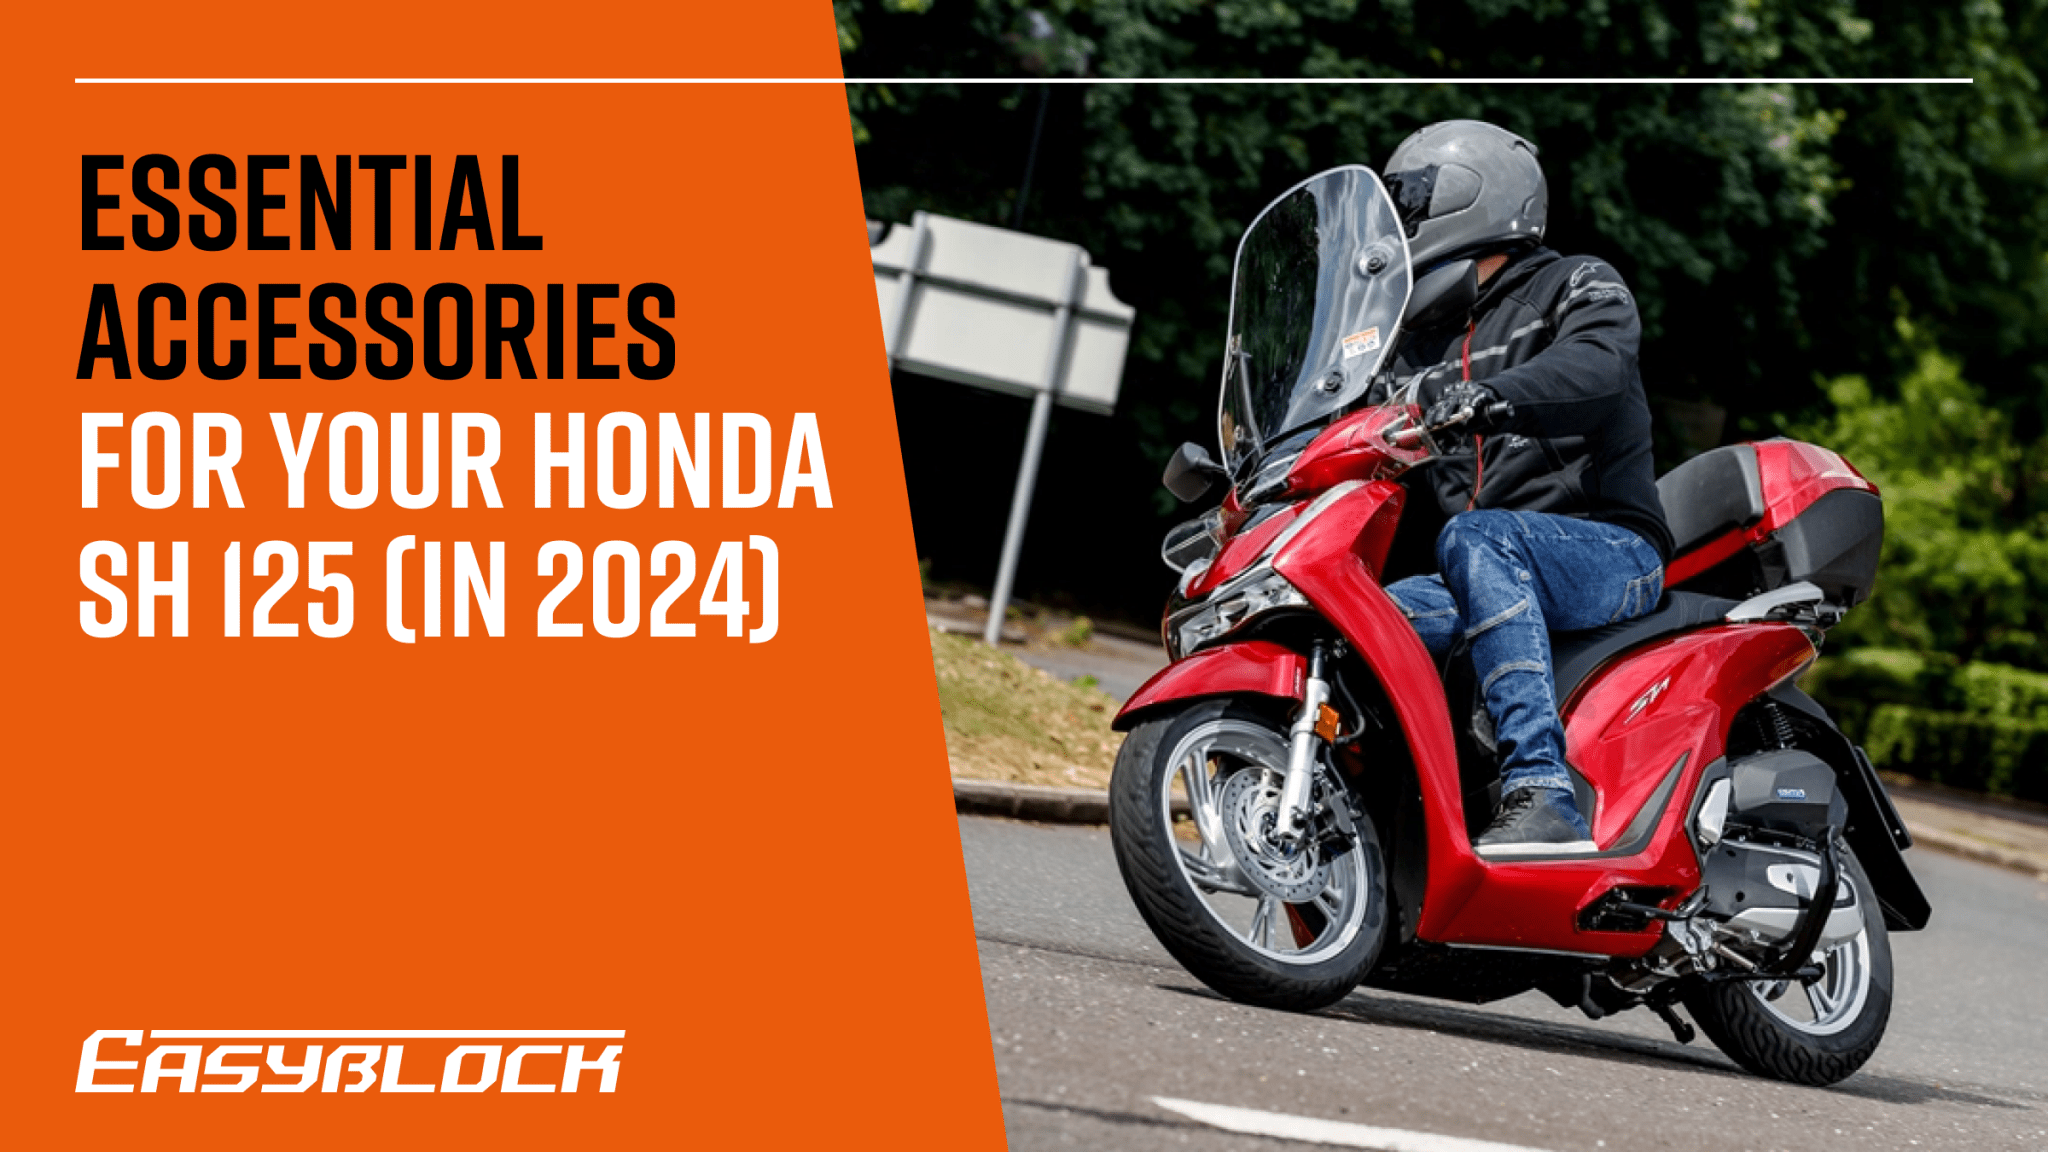 Essential Accessories for Your Honda SH 125 (Updated for 2024)